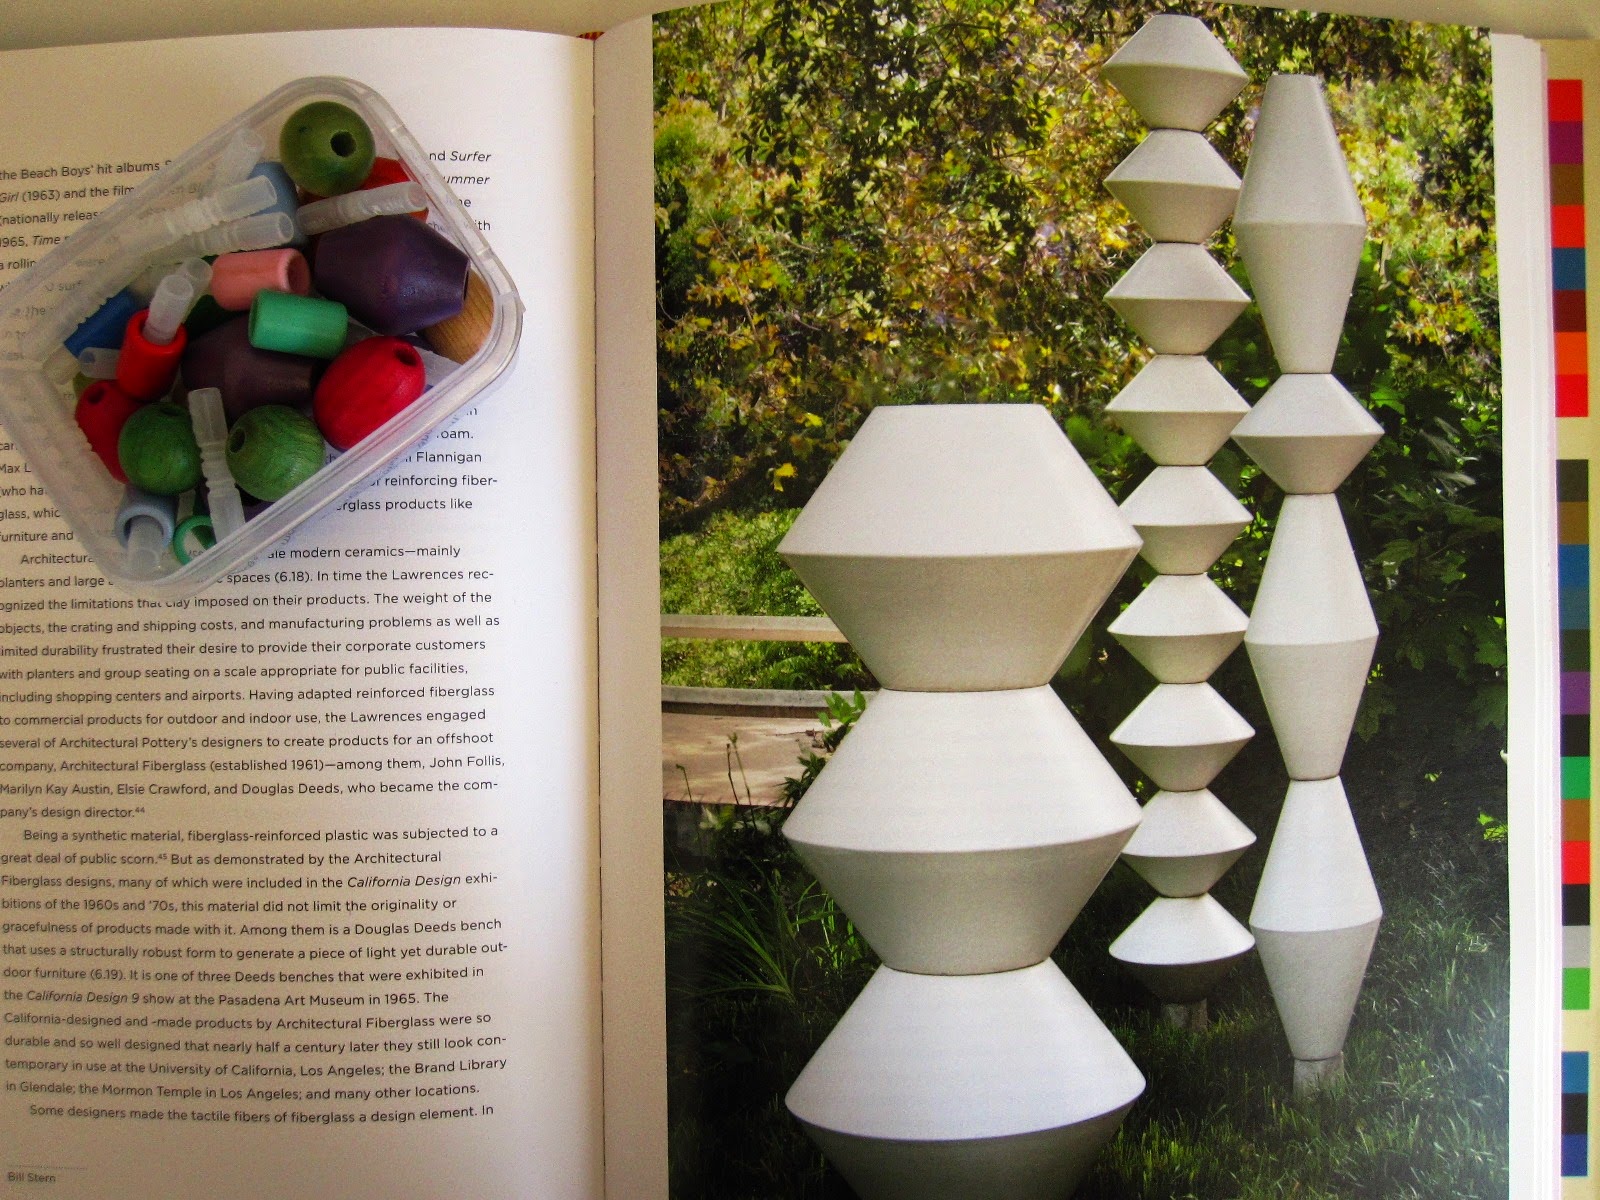 Picture in a book of La Gardo Tackett's garden sculptures, with a container of wooden beads next to it.